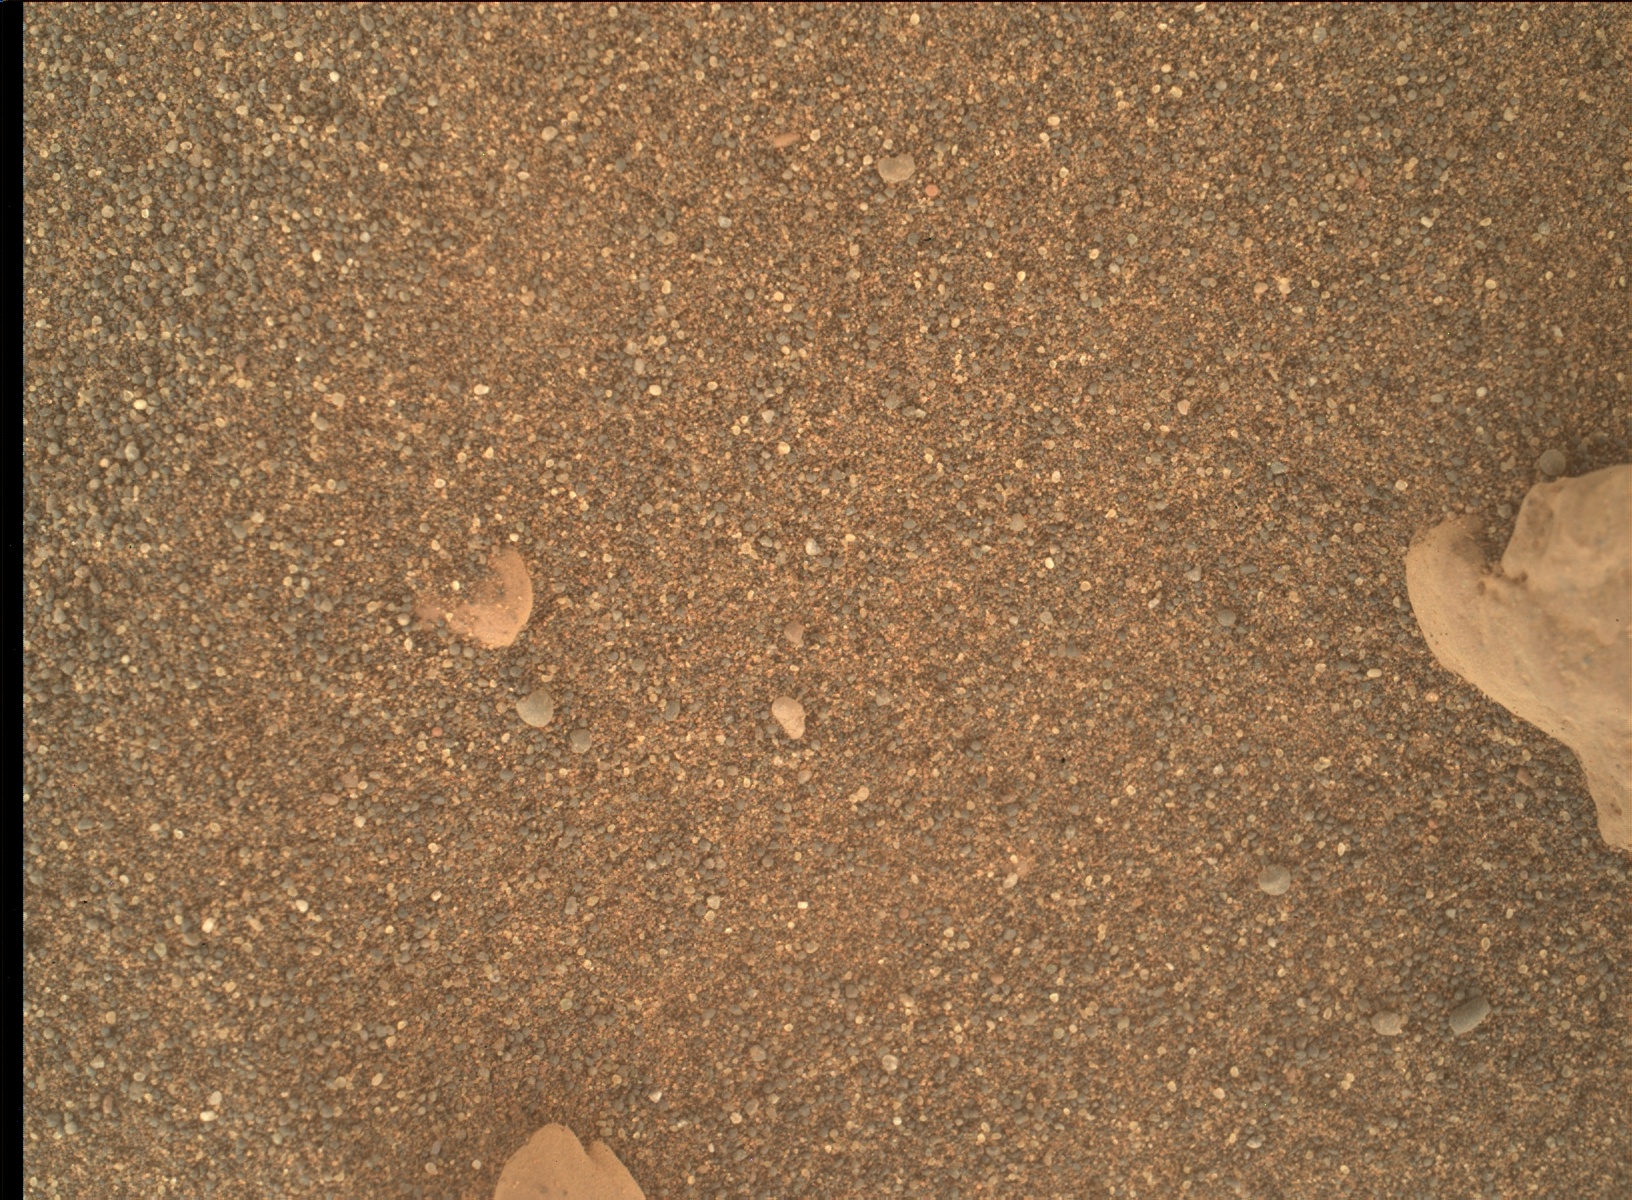 Nasa's Mars rover Curiosity acquired this image using its Mars Hand Lens Imager (MAHLI) on Sol 2384